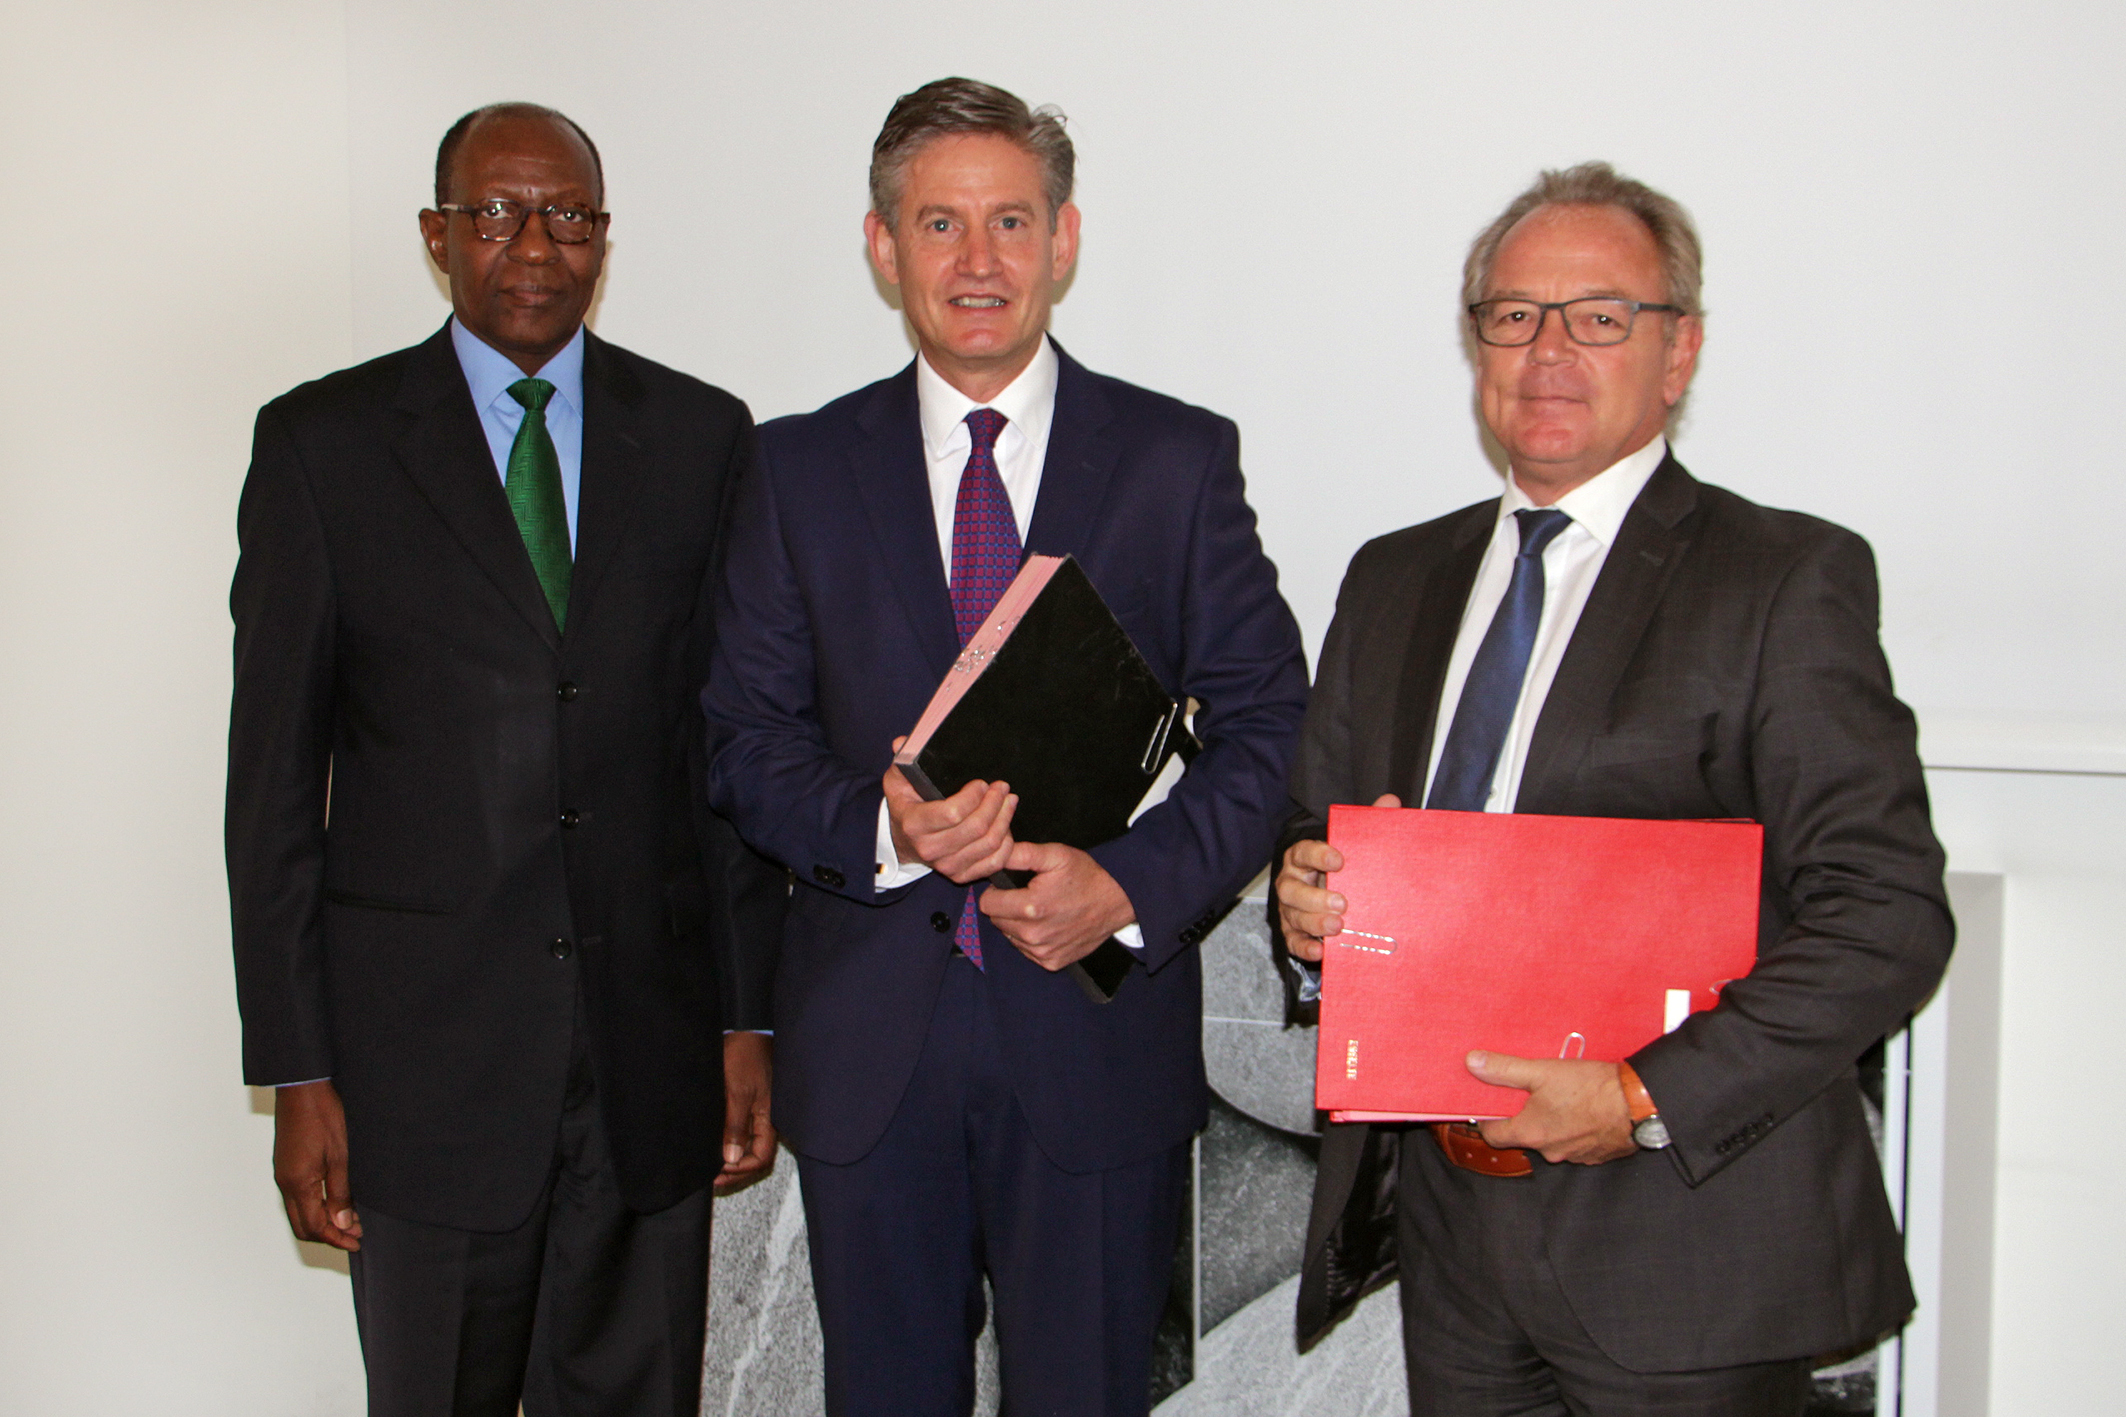 From left: H.E. Dr. Kaire Munionganda Mbuende, Ambassador of the Republic of Namibia to the Kingdoms of Belgium and the Netherlands, the Grand Duchy of Luxembourg, and Mission to the European Union; Andrew Bradley, Director of the Office of International IDEA to the European Union; Carl Michiels, Chairman of the Management Committee of the BTC at a signing ceremony between the BTC and International IDEA on 4 OCtober 2017